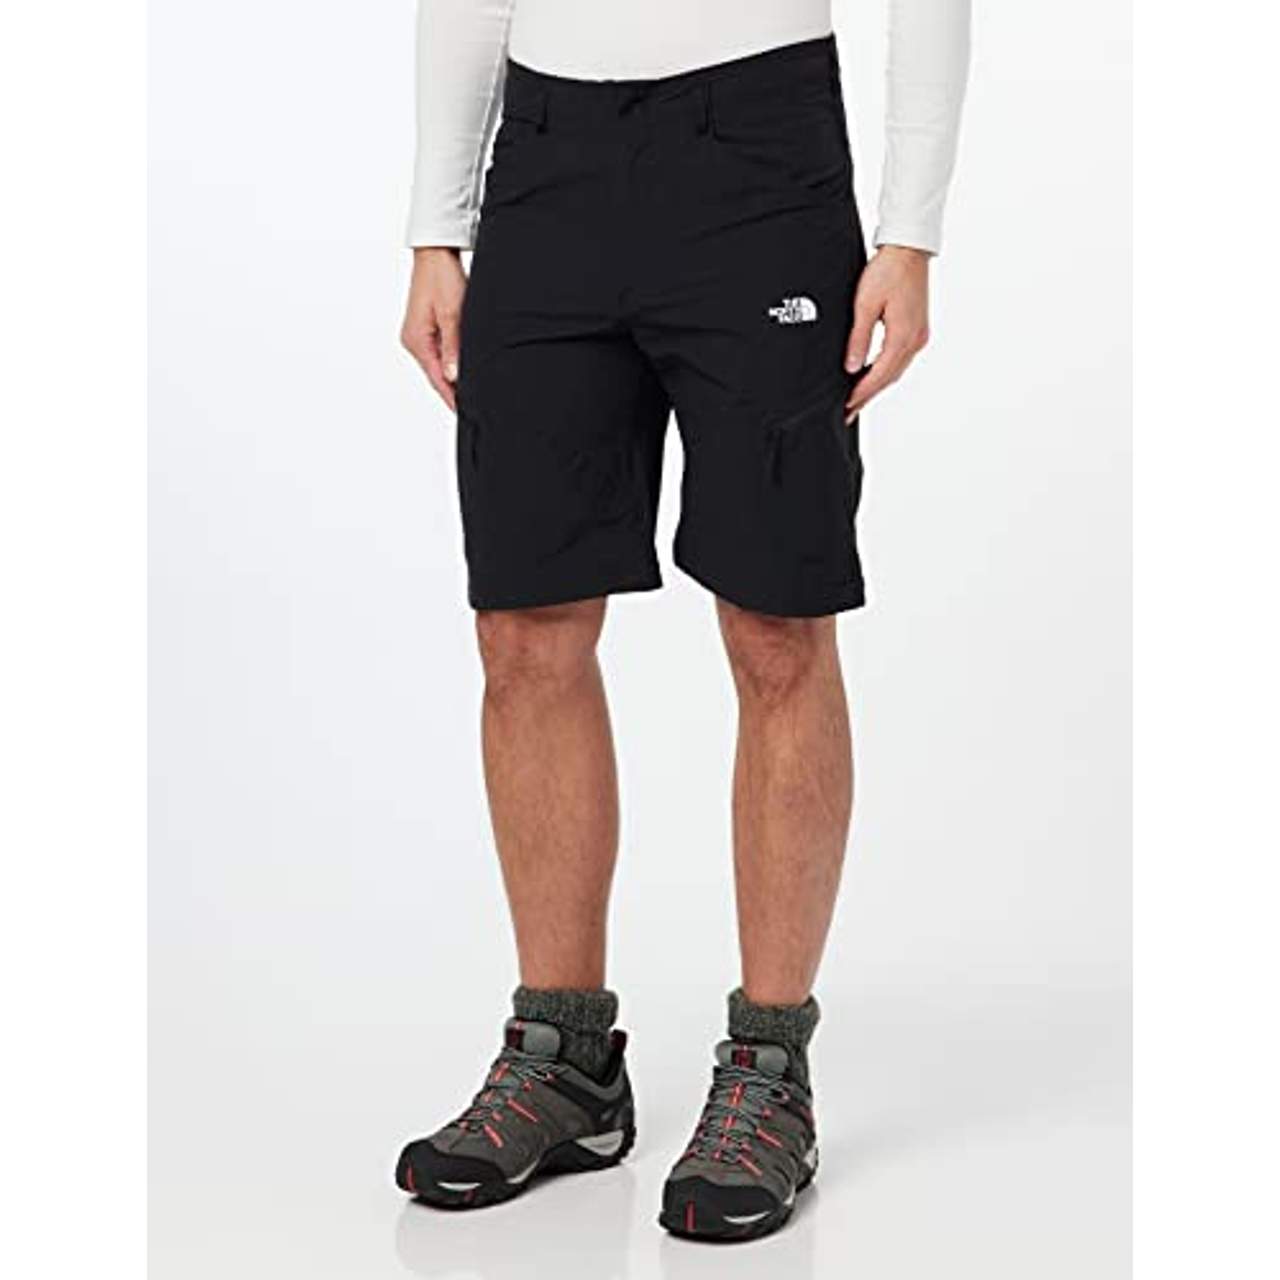 The North Face Herren Hose Exploration Convertible